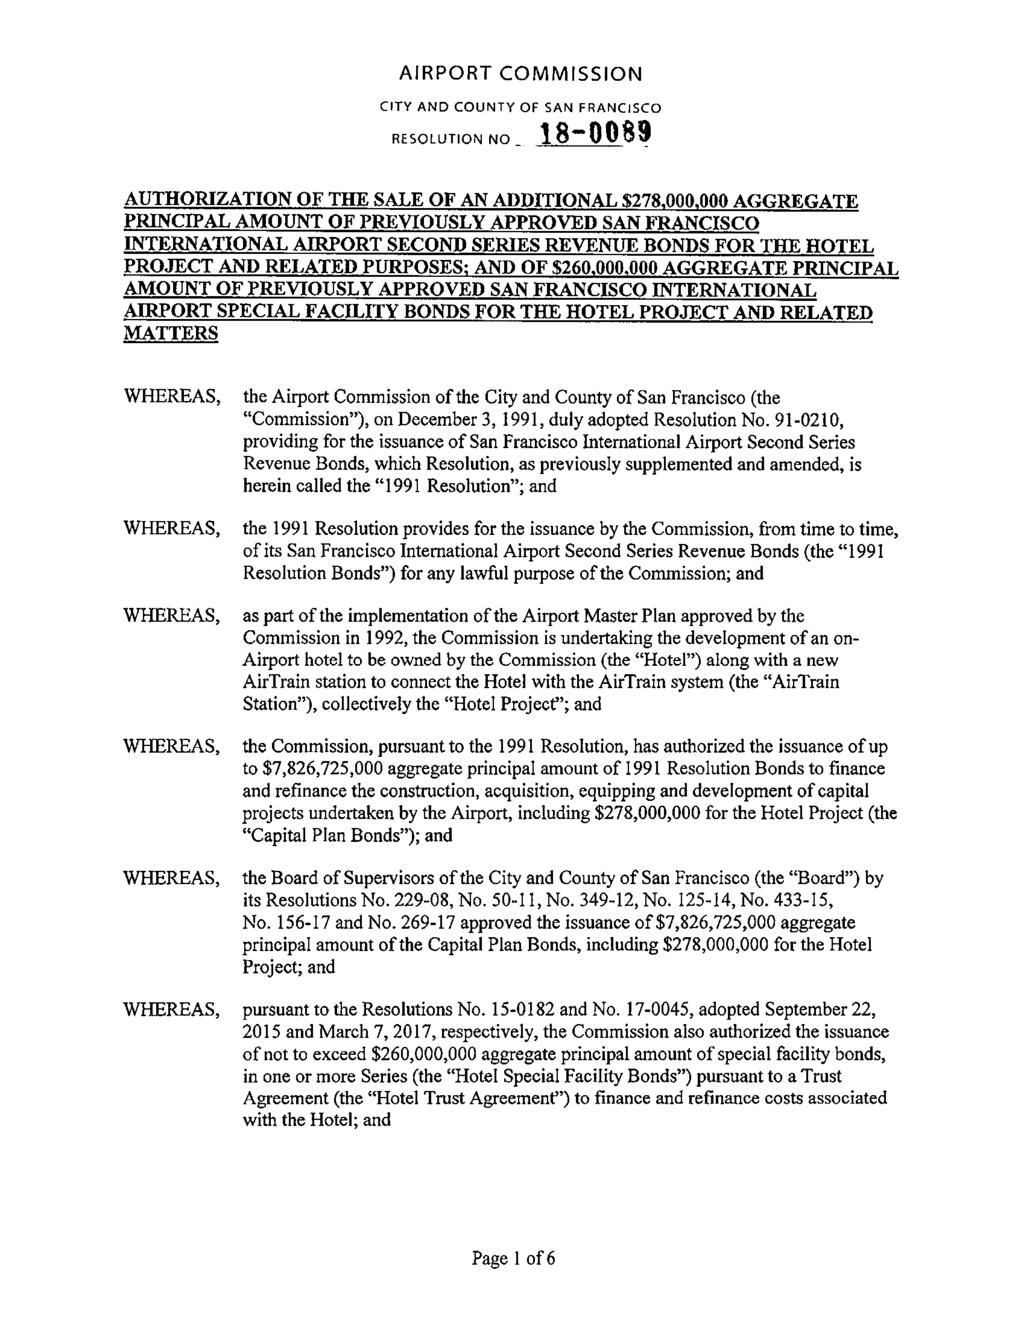 RESOLUTION NO 18-0089 AUTHORIZATION OF THE SALE OF AN ADDITIONAL $278,000,000 AGGREGATE PRINCIPAL AMOUNT OF PREVIOUSLY APPROVED SAN FRANCISCO INTERNATIONAL AIRPORT SECOND SERIES REVENUE BONDS FOR THE